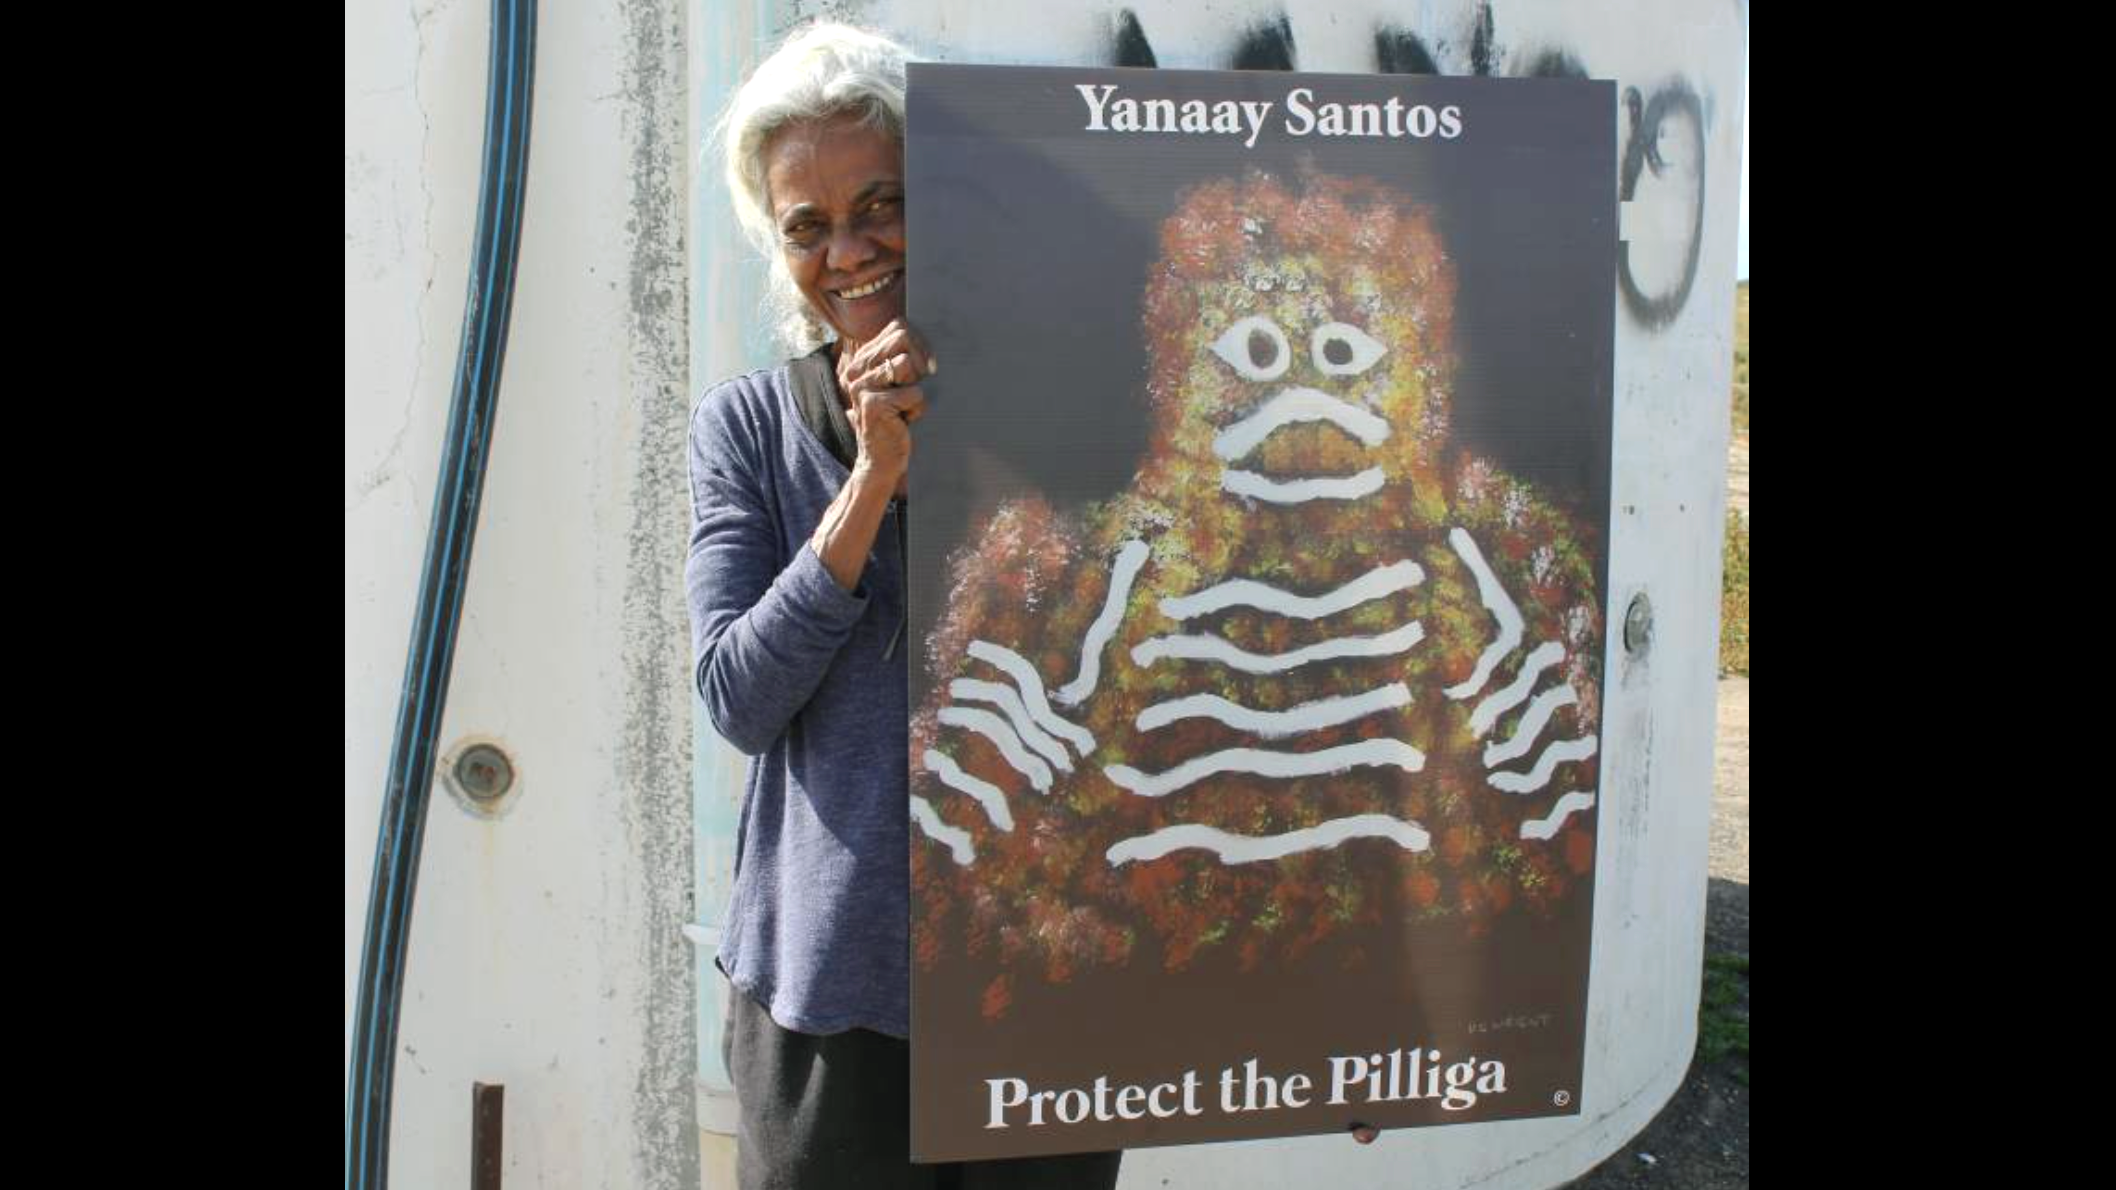 A slender but very strong looking mature Gomeroi Woman is standing in front of a wall that appears to be part of some kind of holding tank. She is holding a sign that says “Yanaay Santos, Protect the Pilliga” and an image invoking a traditional style depiction of the face and shoulders of a humanoid figure using cultural designs. The woman is wearing loose casual clothing (black pants and blue shirt); her hair is silver white and tied back, and she is smiling.